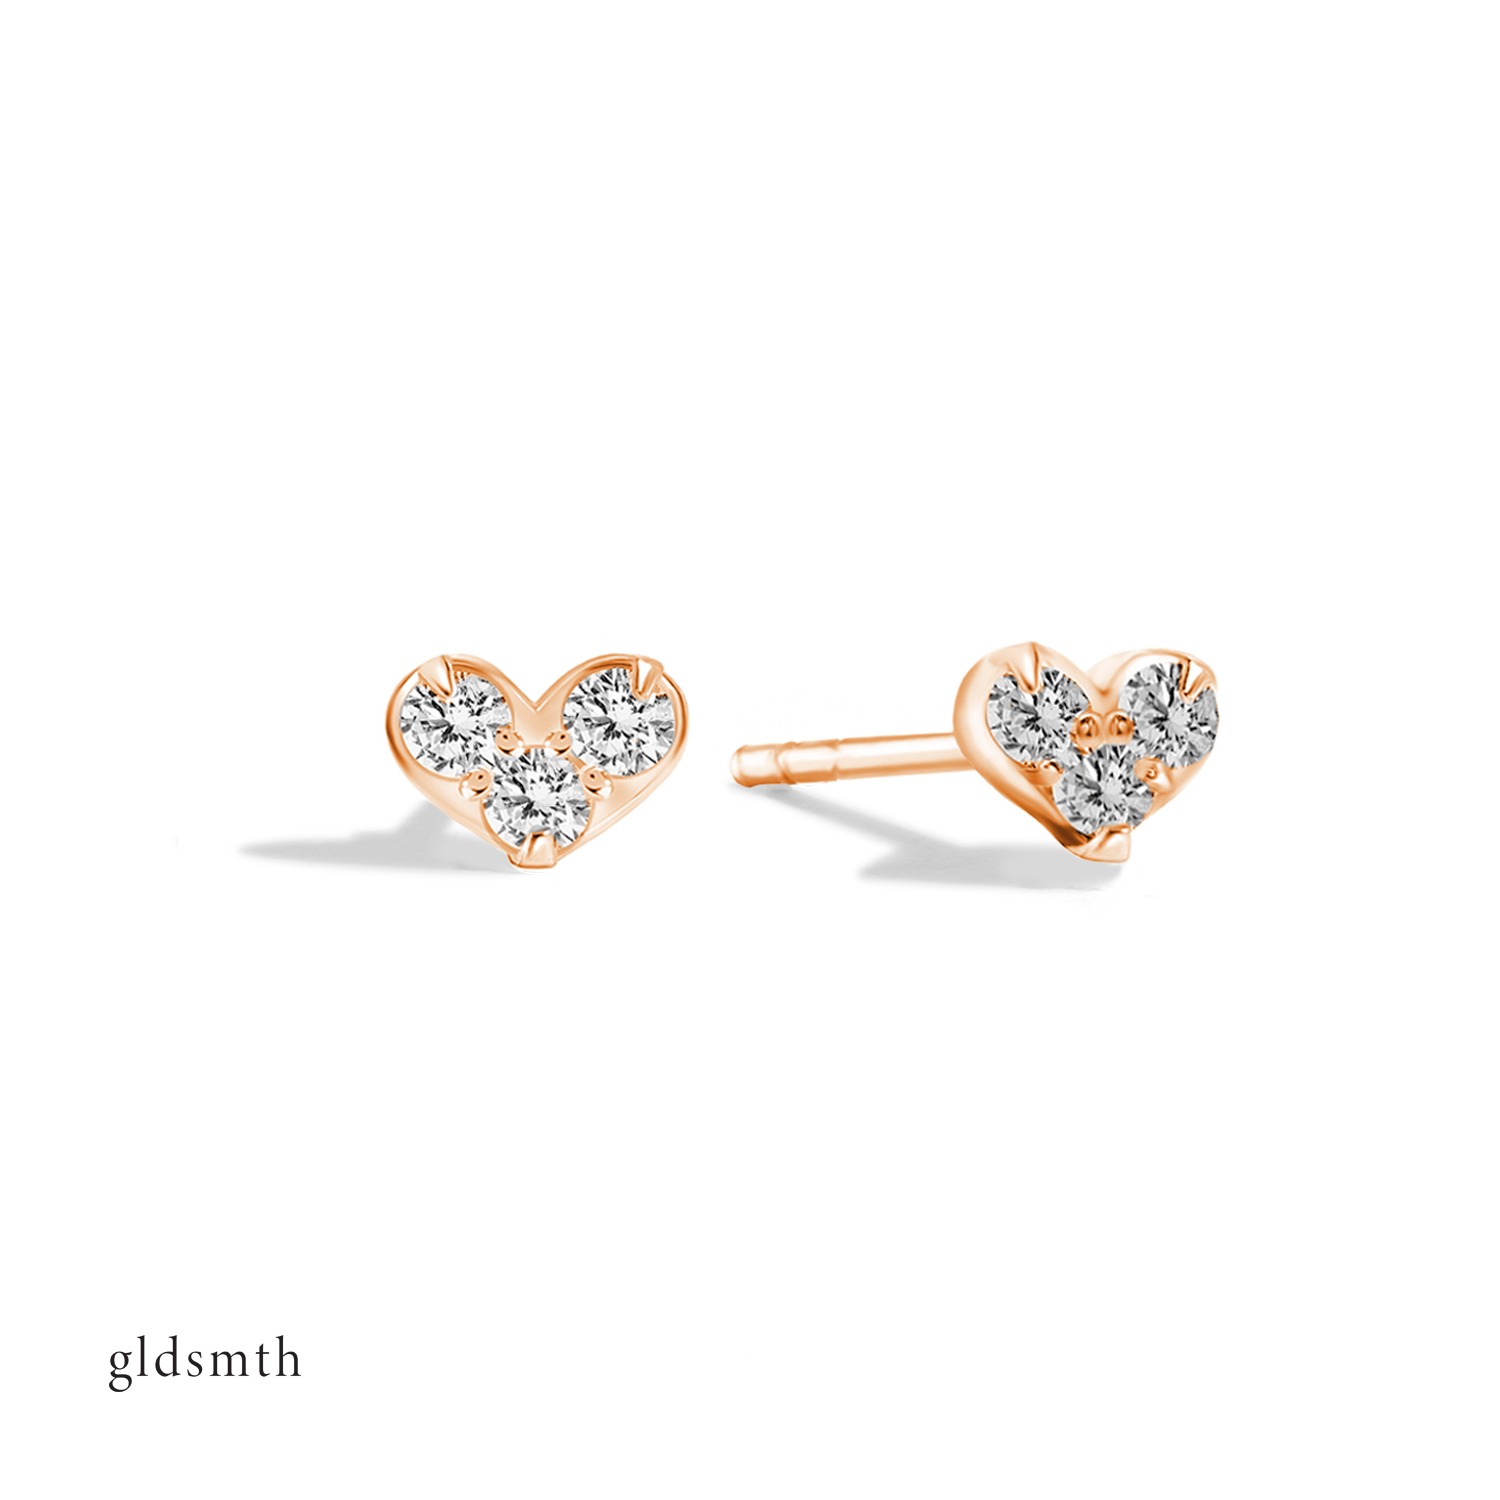 Elegant and fine handcrafted 10k solid rose gold earrings with conflict-free diamonds.